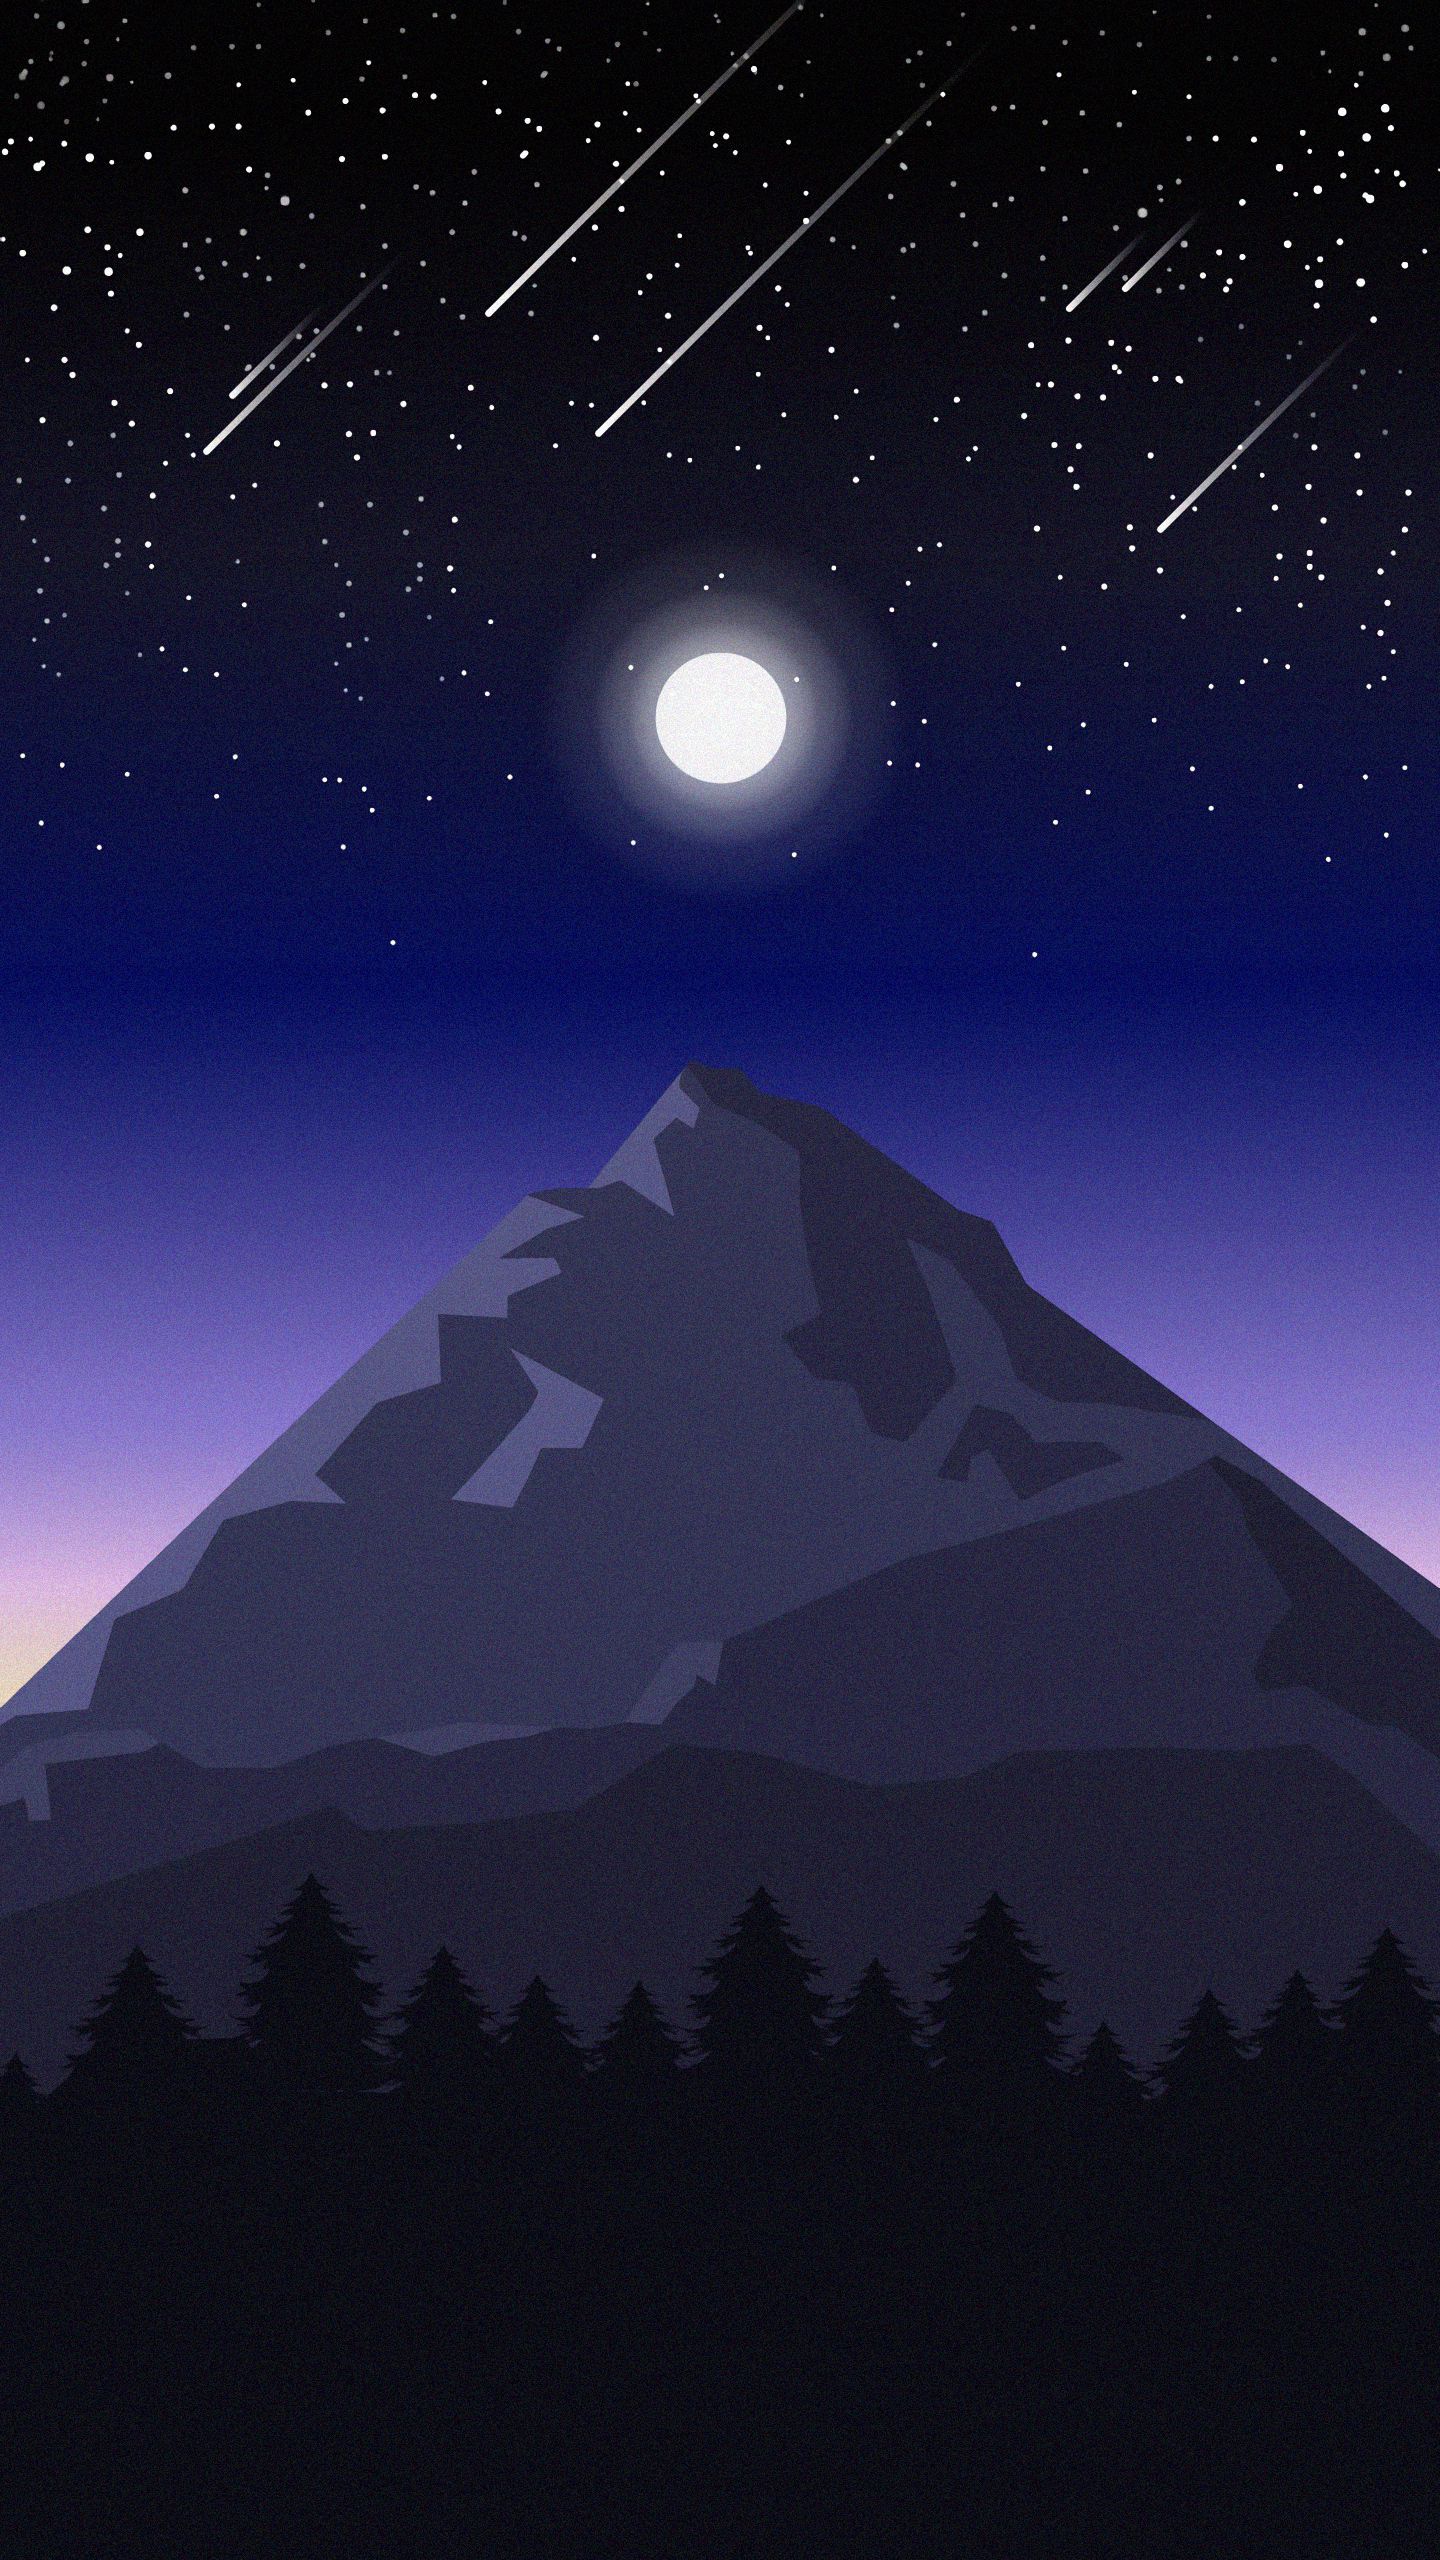 79344 free wallpaper 720x1560 for phone, download images art, night, vector, landscape 720x1560 for mobile